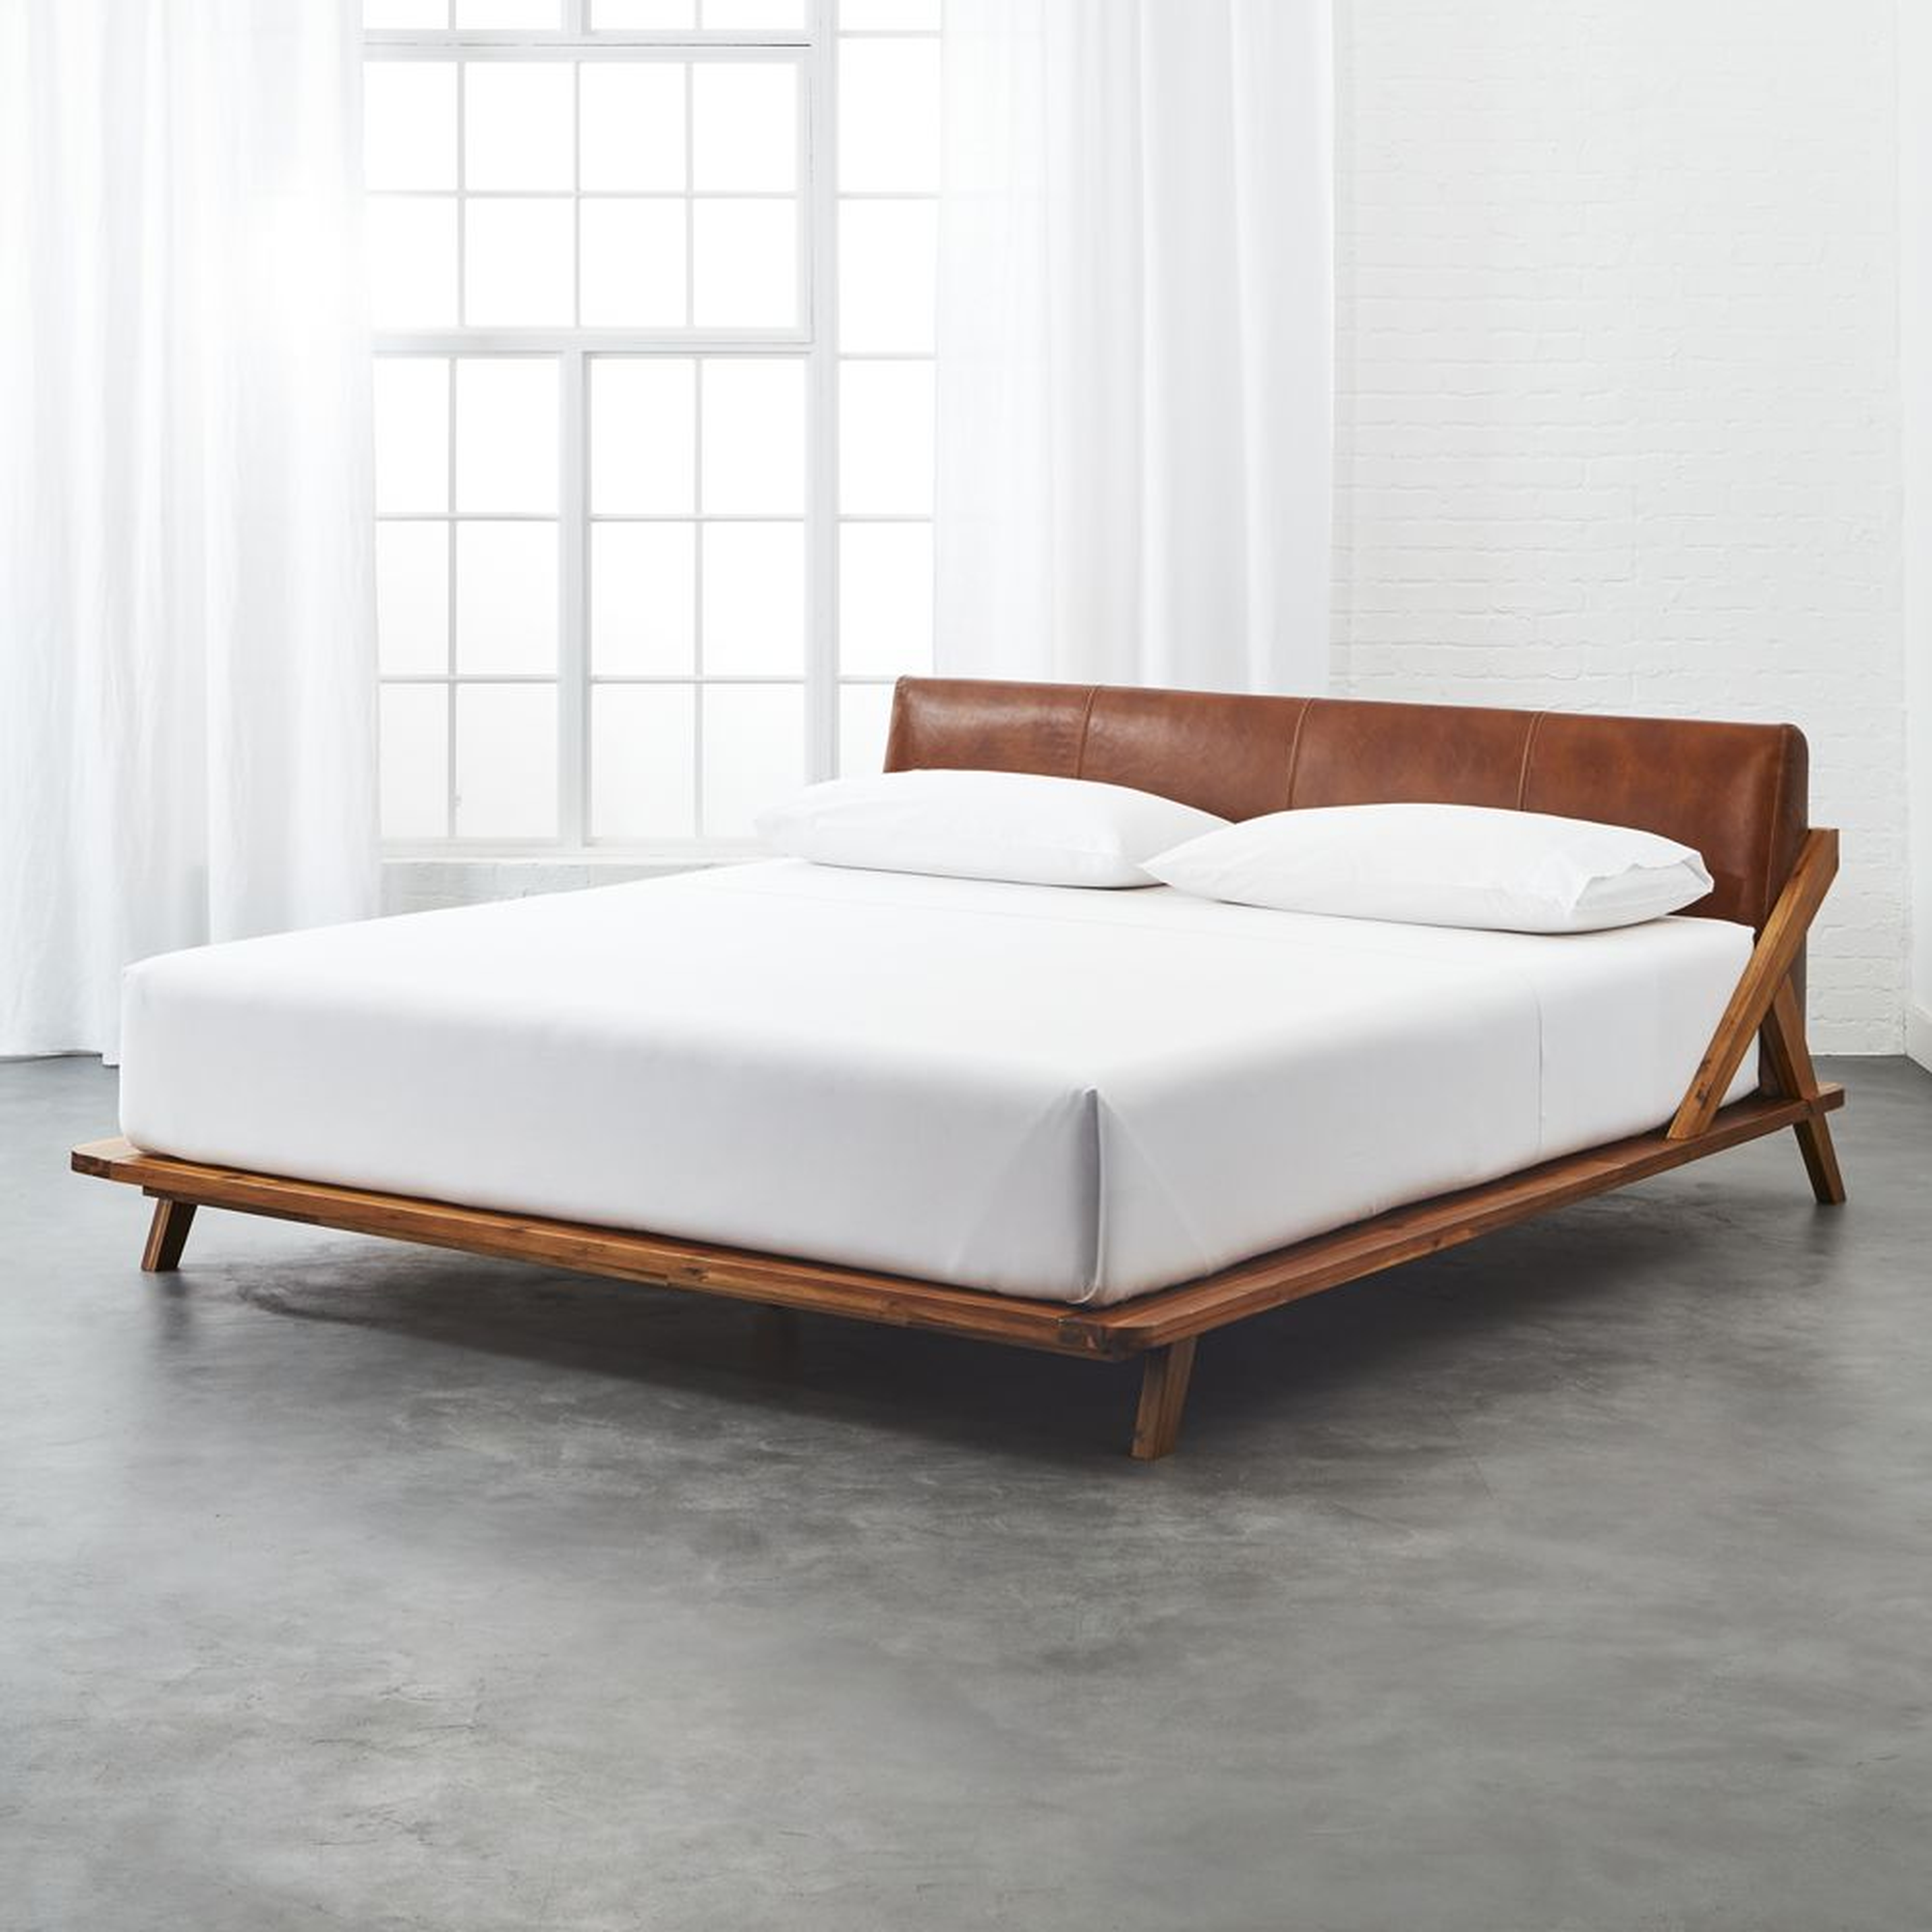 drommen acacia king bed with leather headboard - CB2